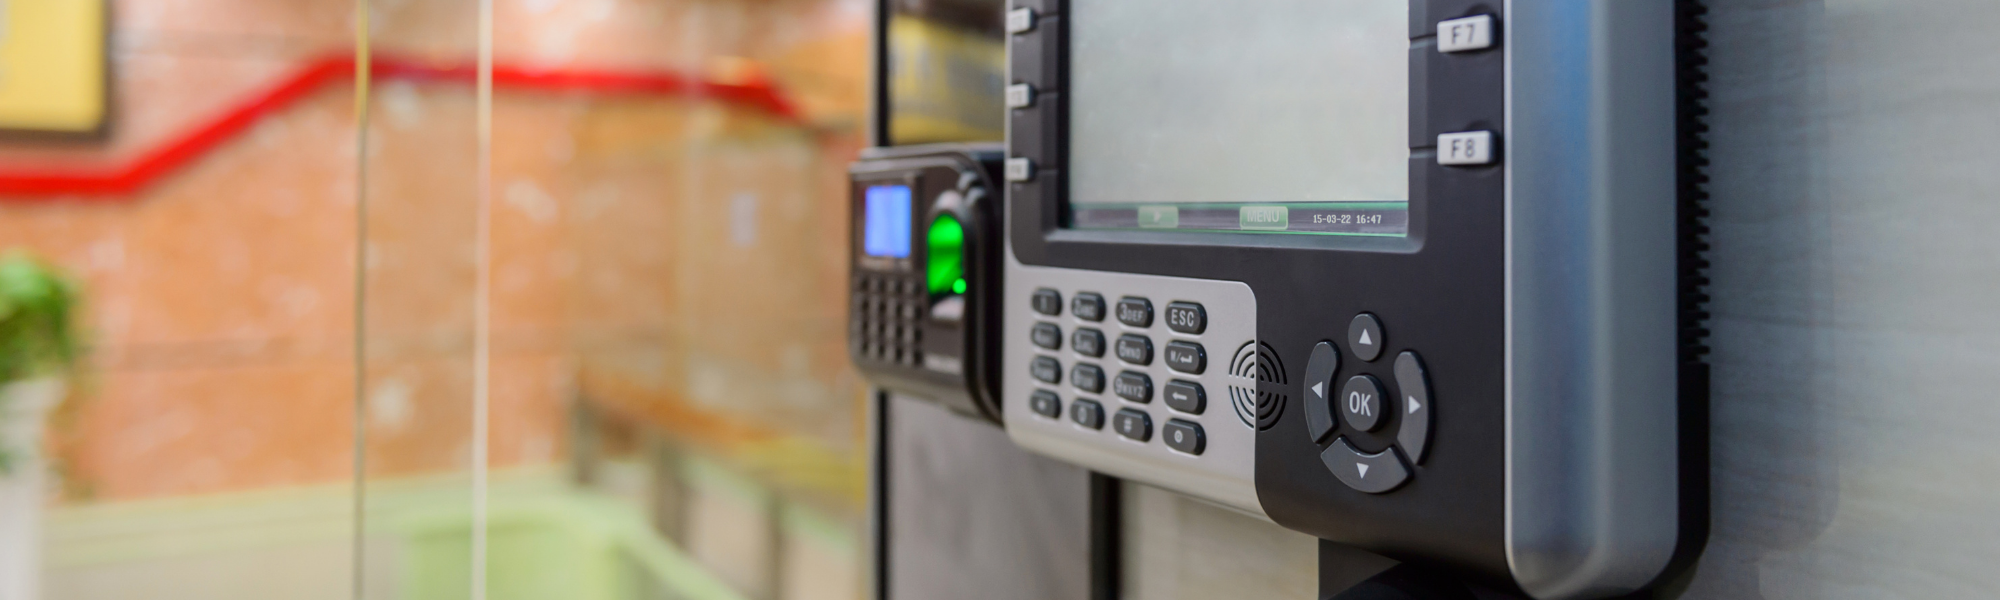 access control security system 